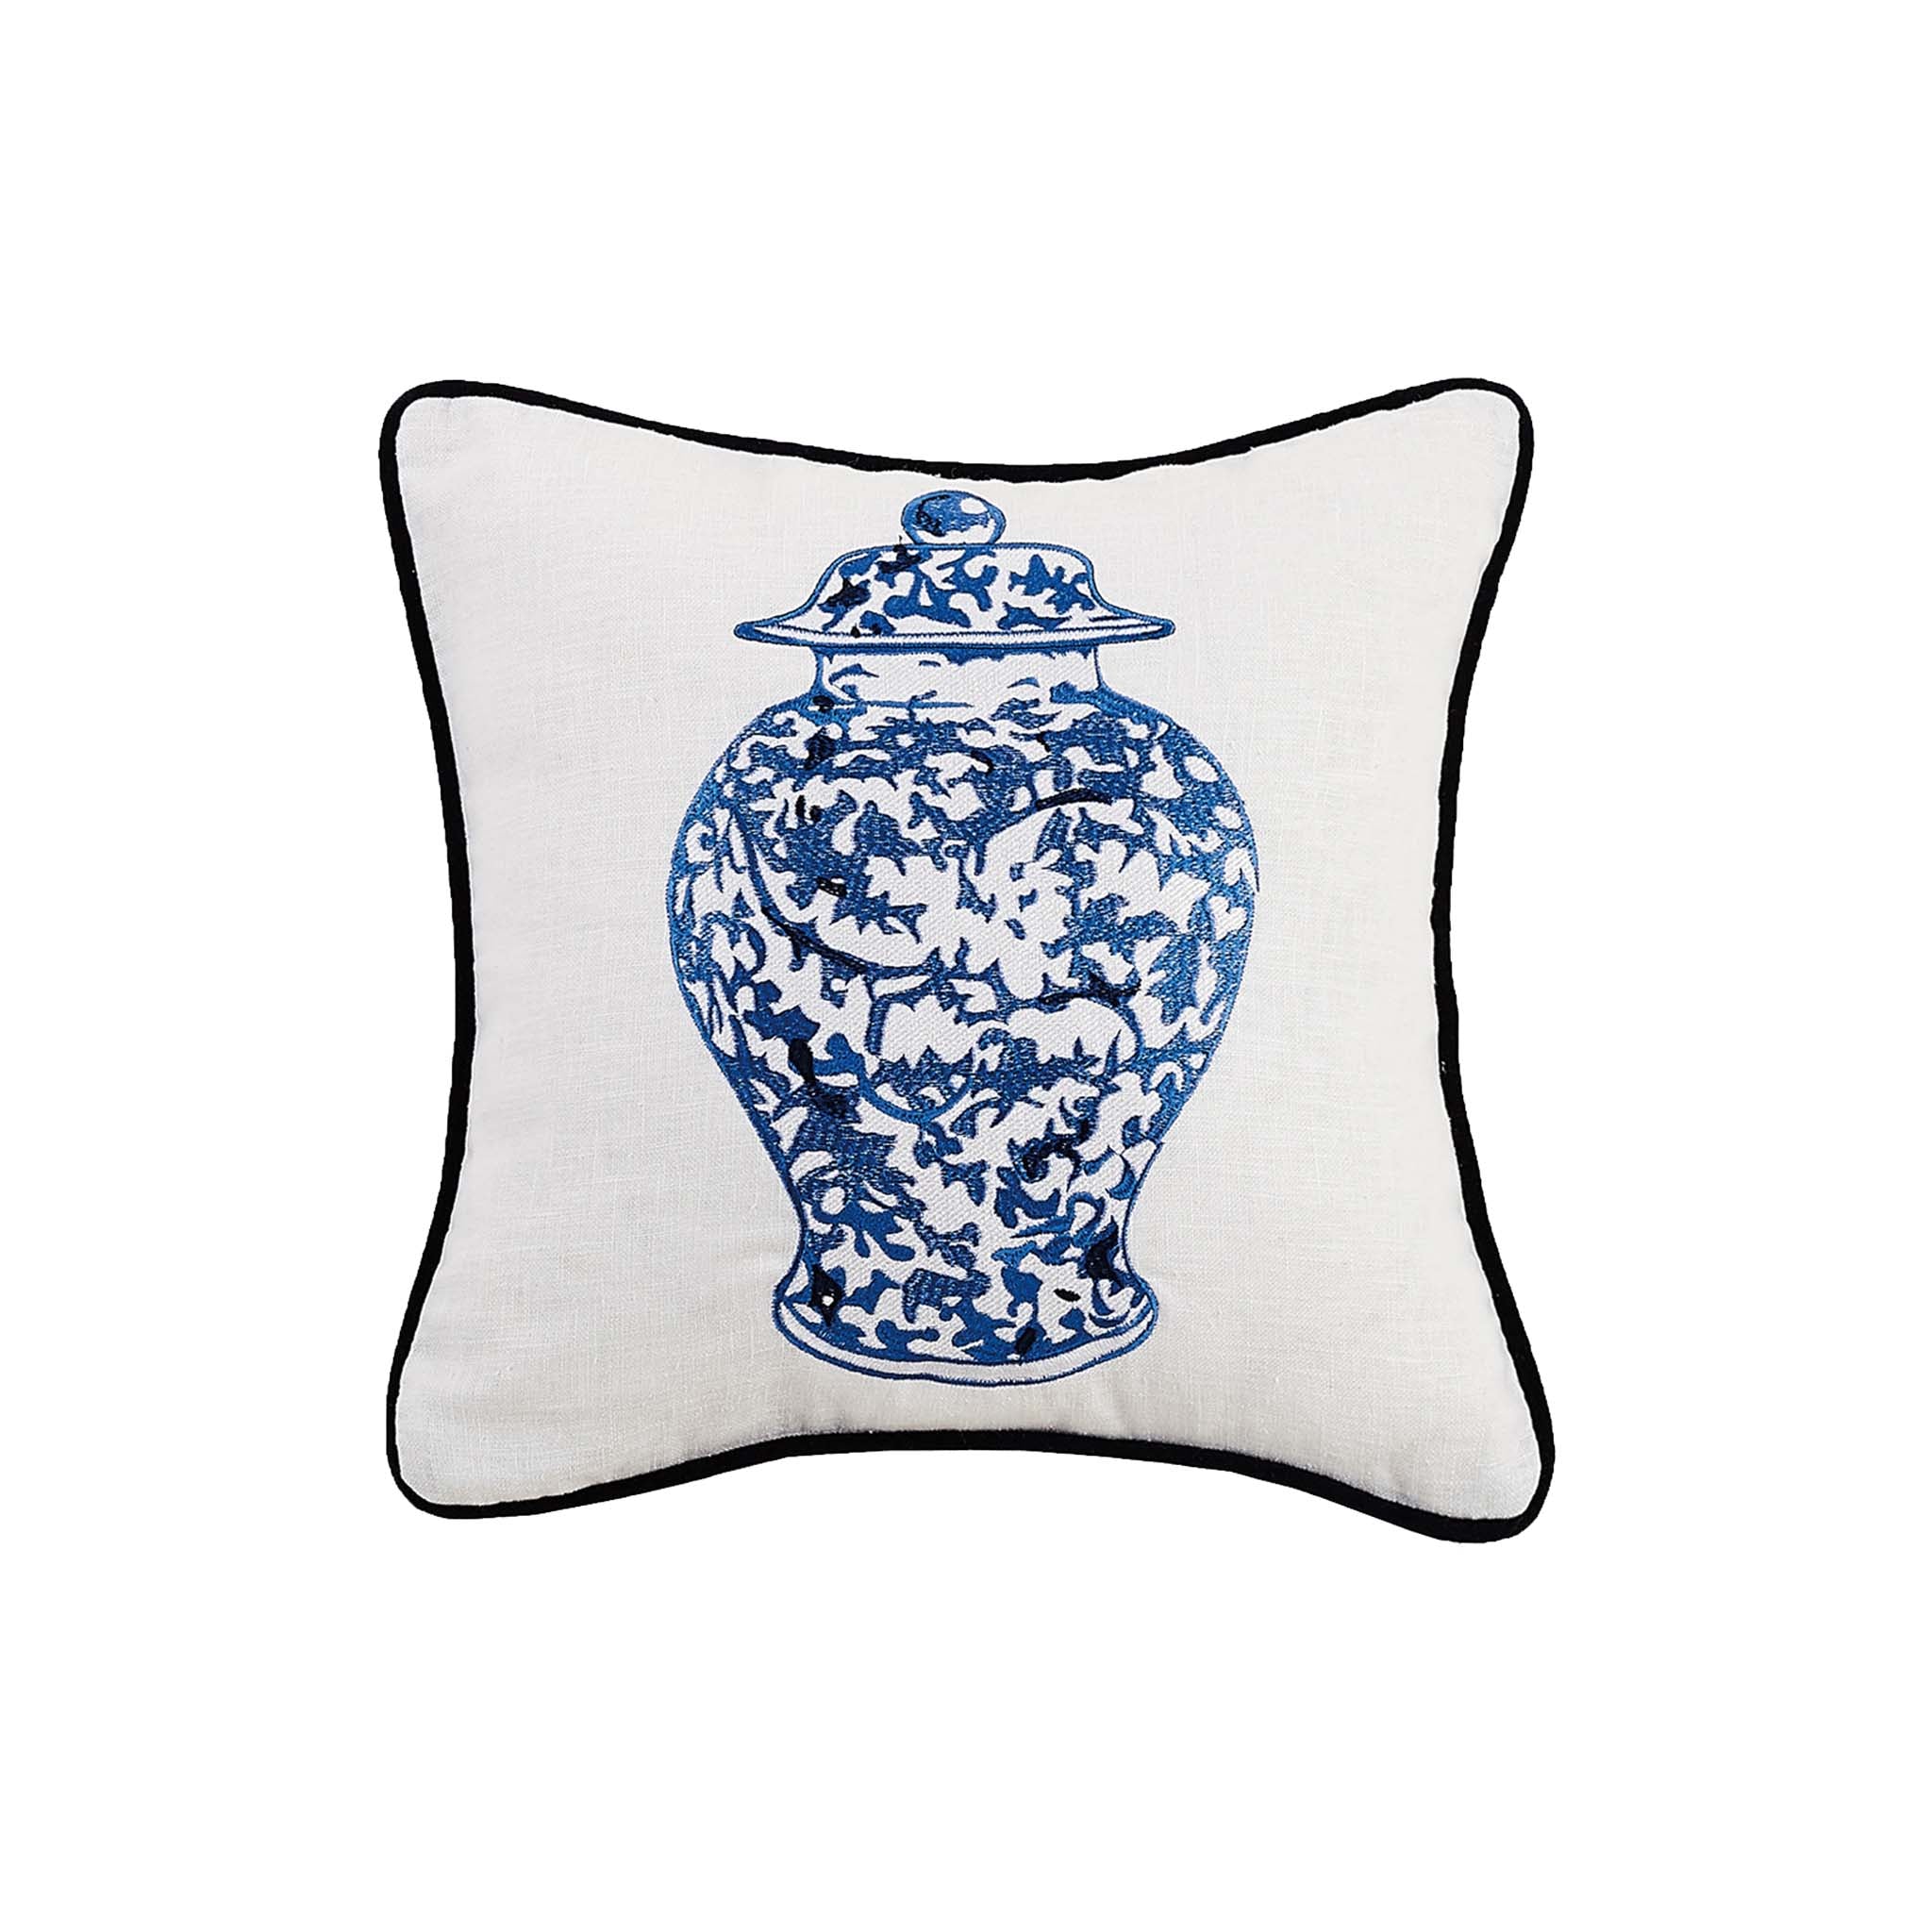 Blue and White Chinoiserie Vase with Lid Embroidered Pillow